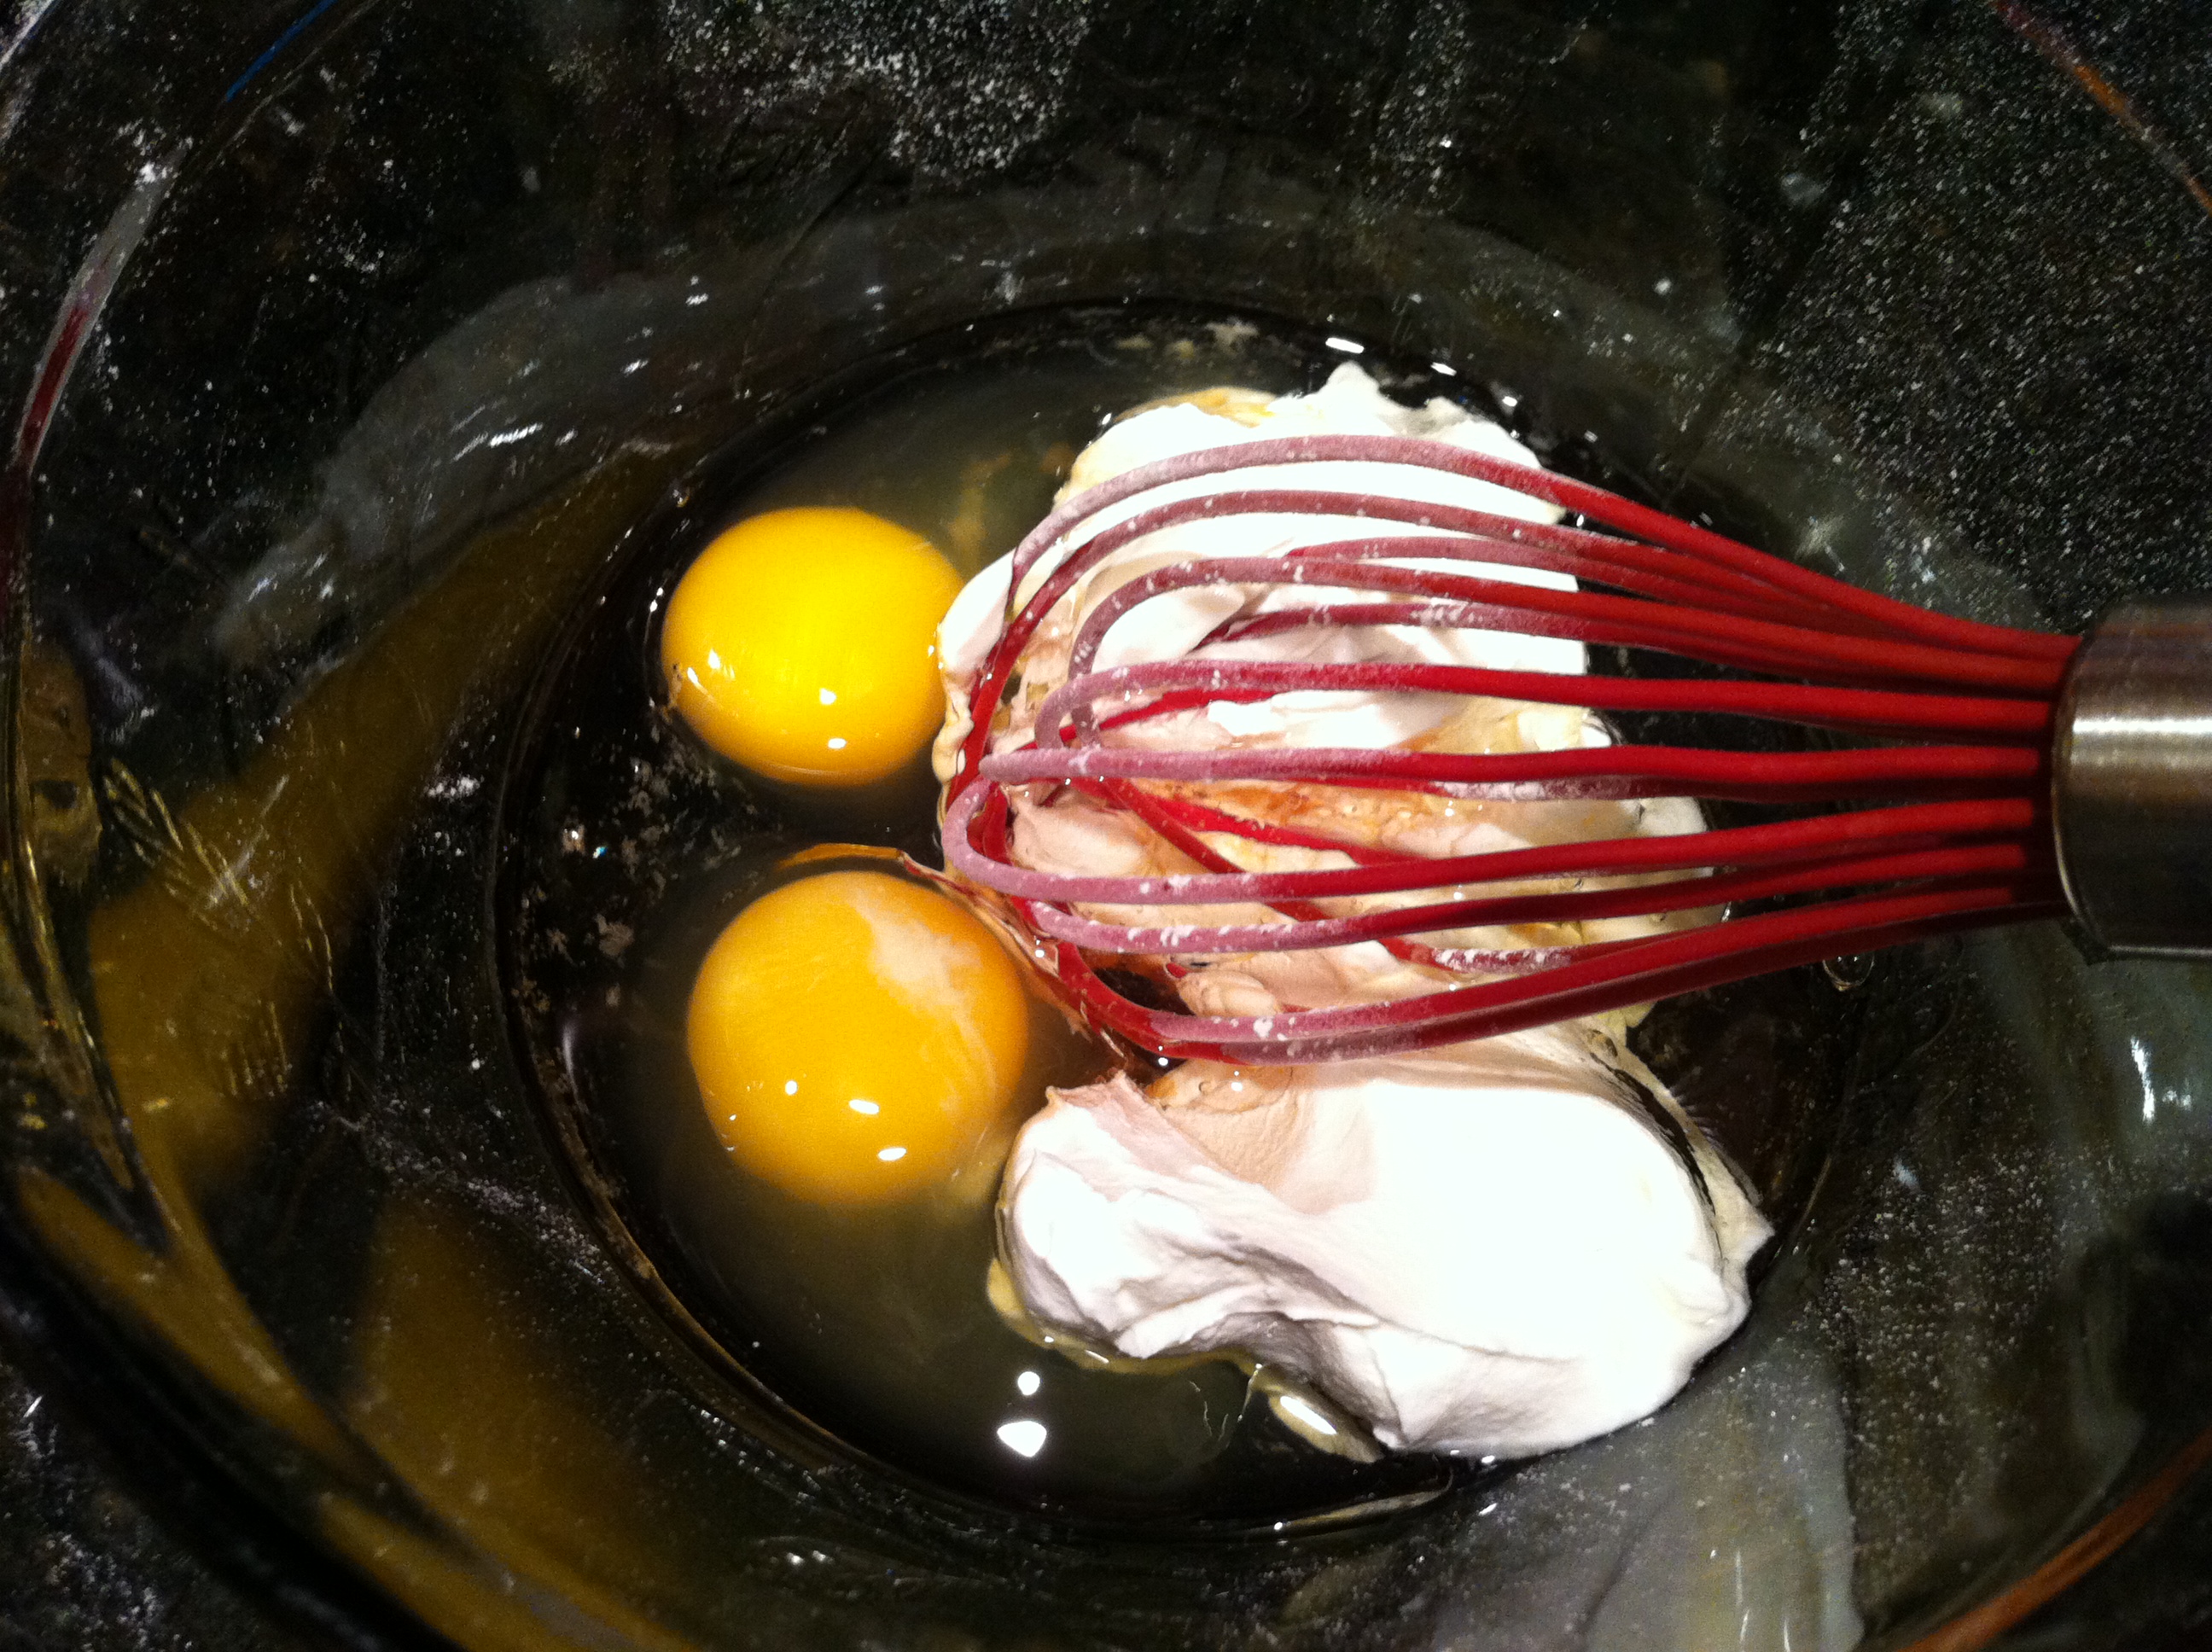 Eggs, Sour Cream, Vegetable, Oil, and Vanilla Extract for Belgian Waffle Recipe